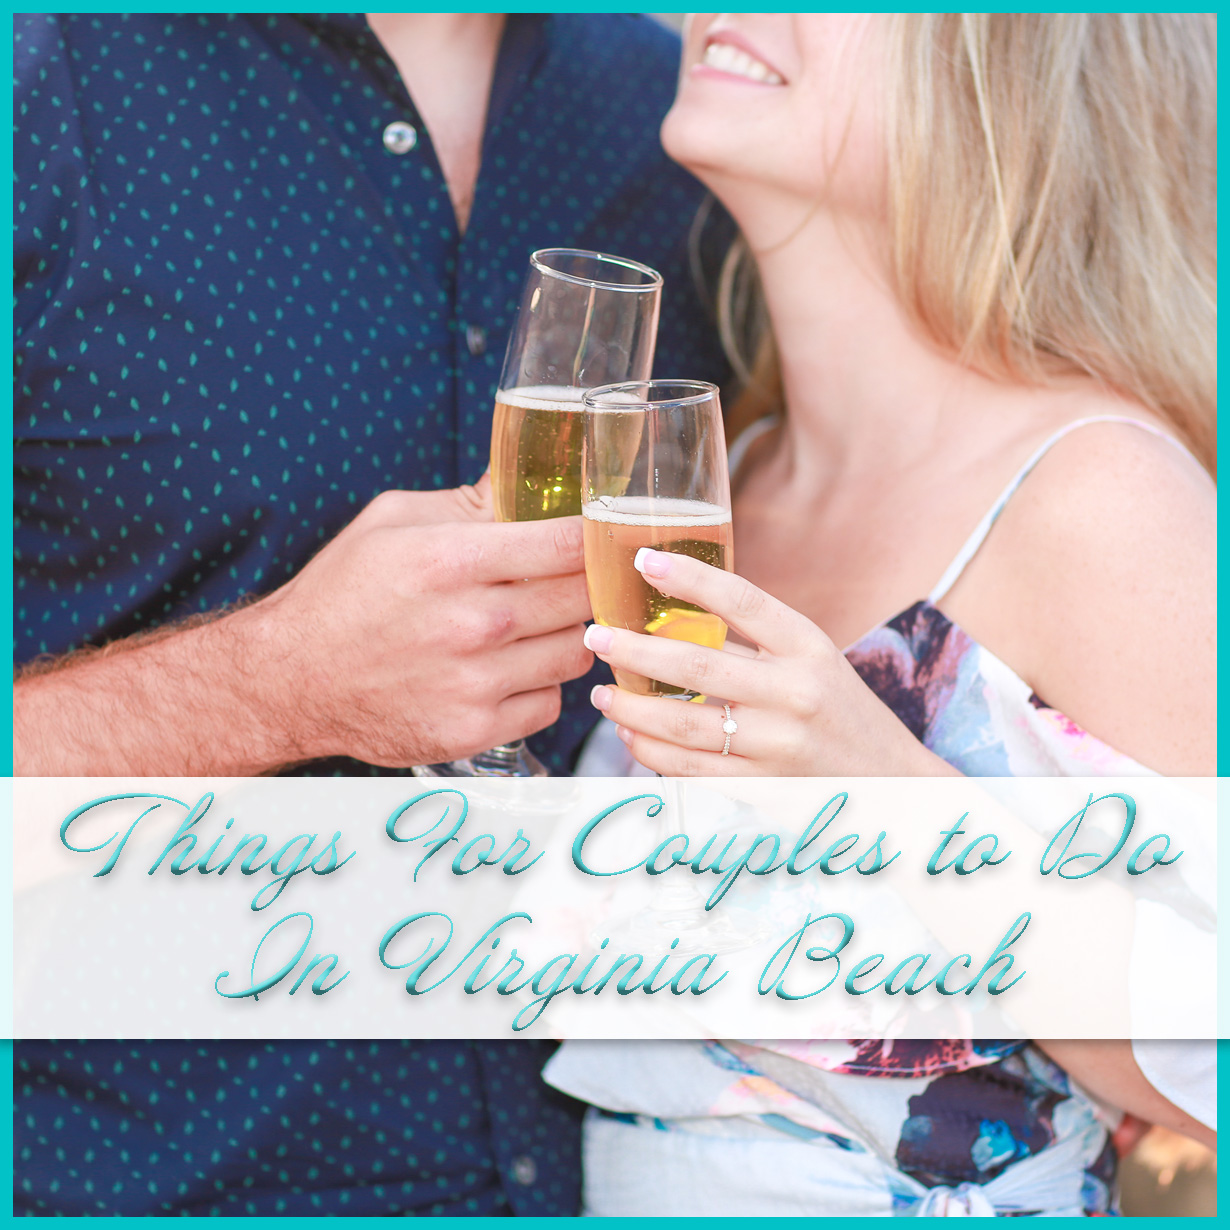 Things For Couples to Do In Virginia Beach